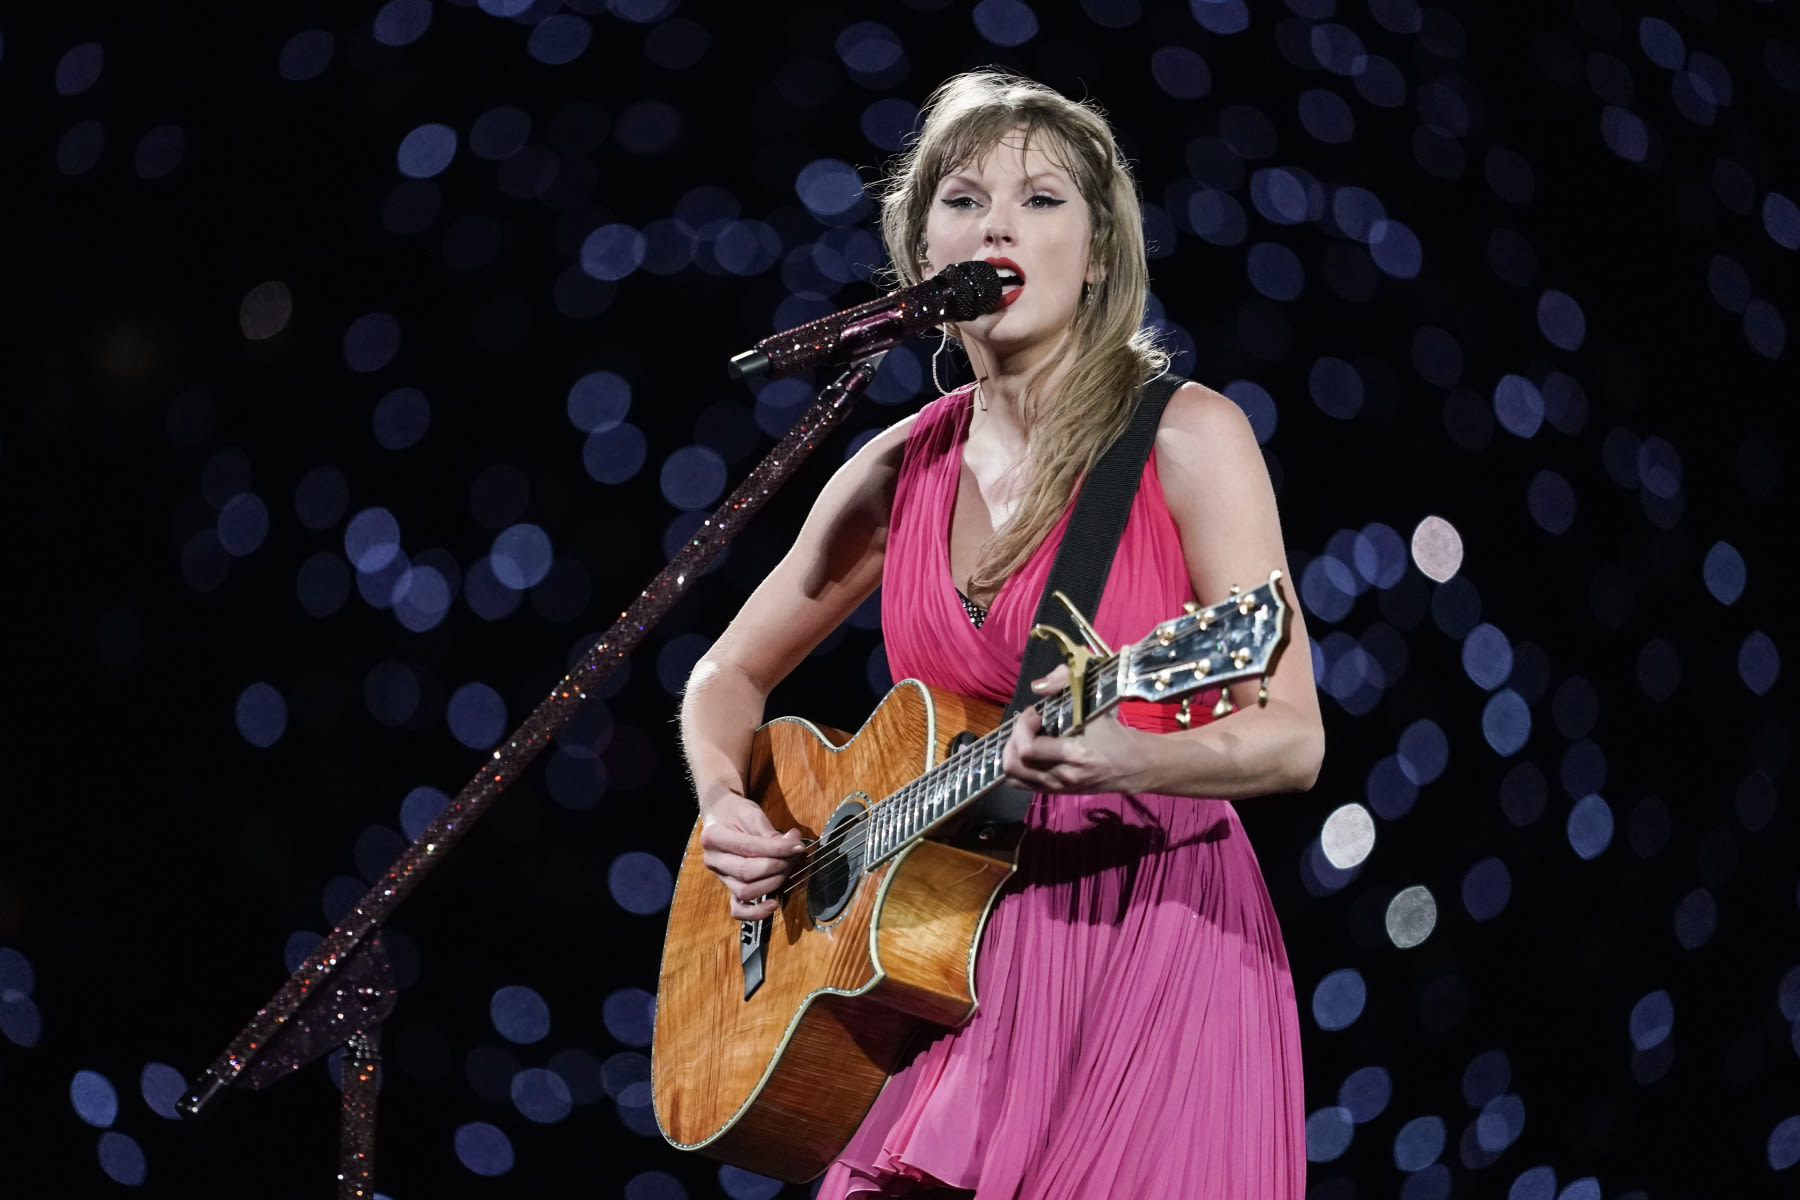 Watch Taylor Swift Debut ‘Don’t You’ Live in Munich